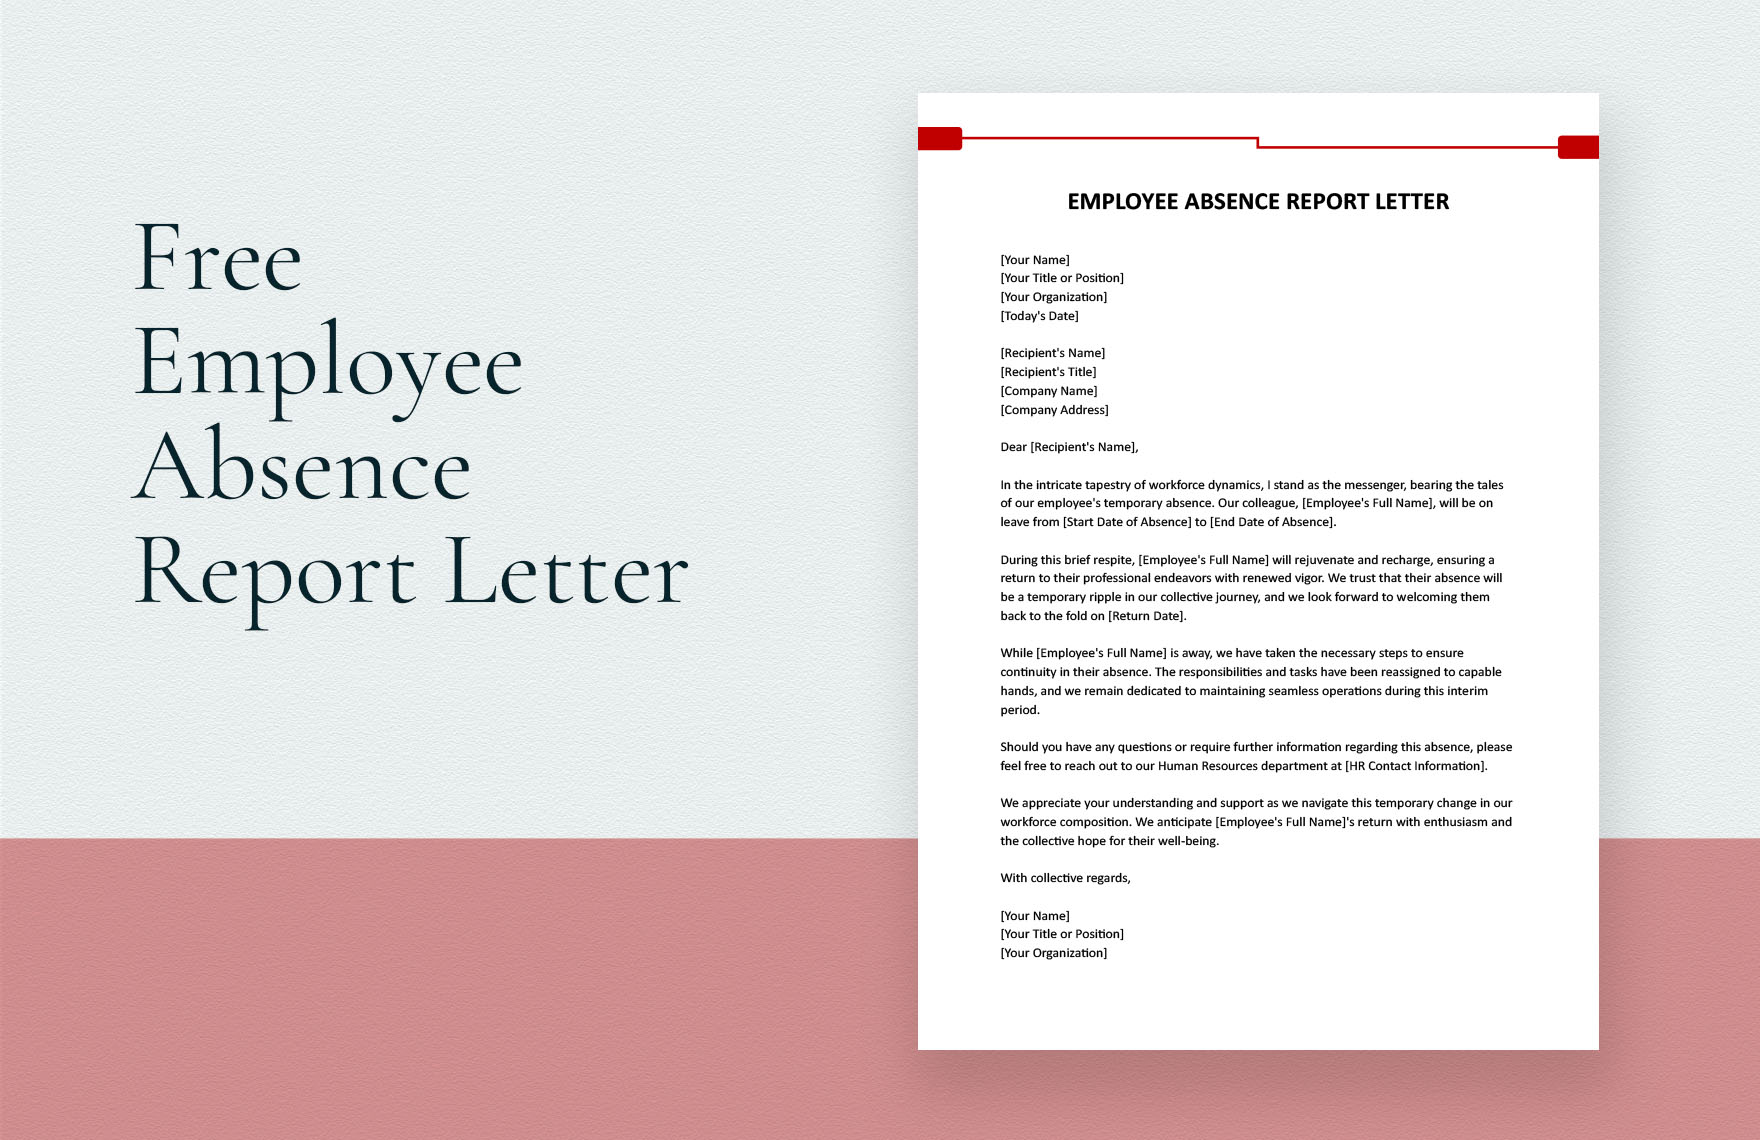 Employee Absence Report Letter